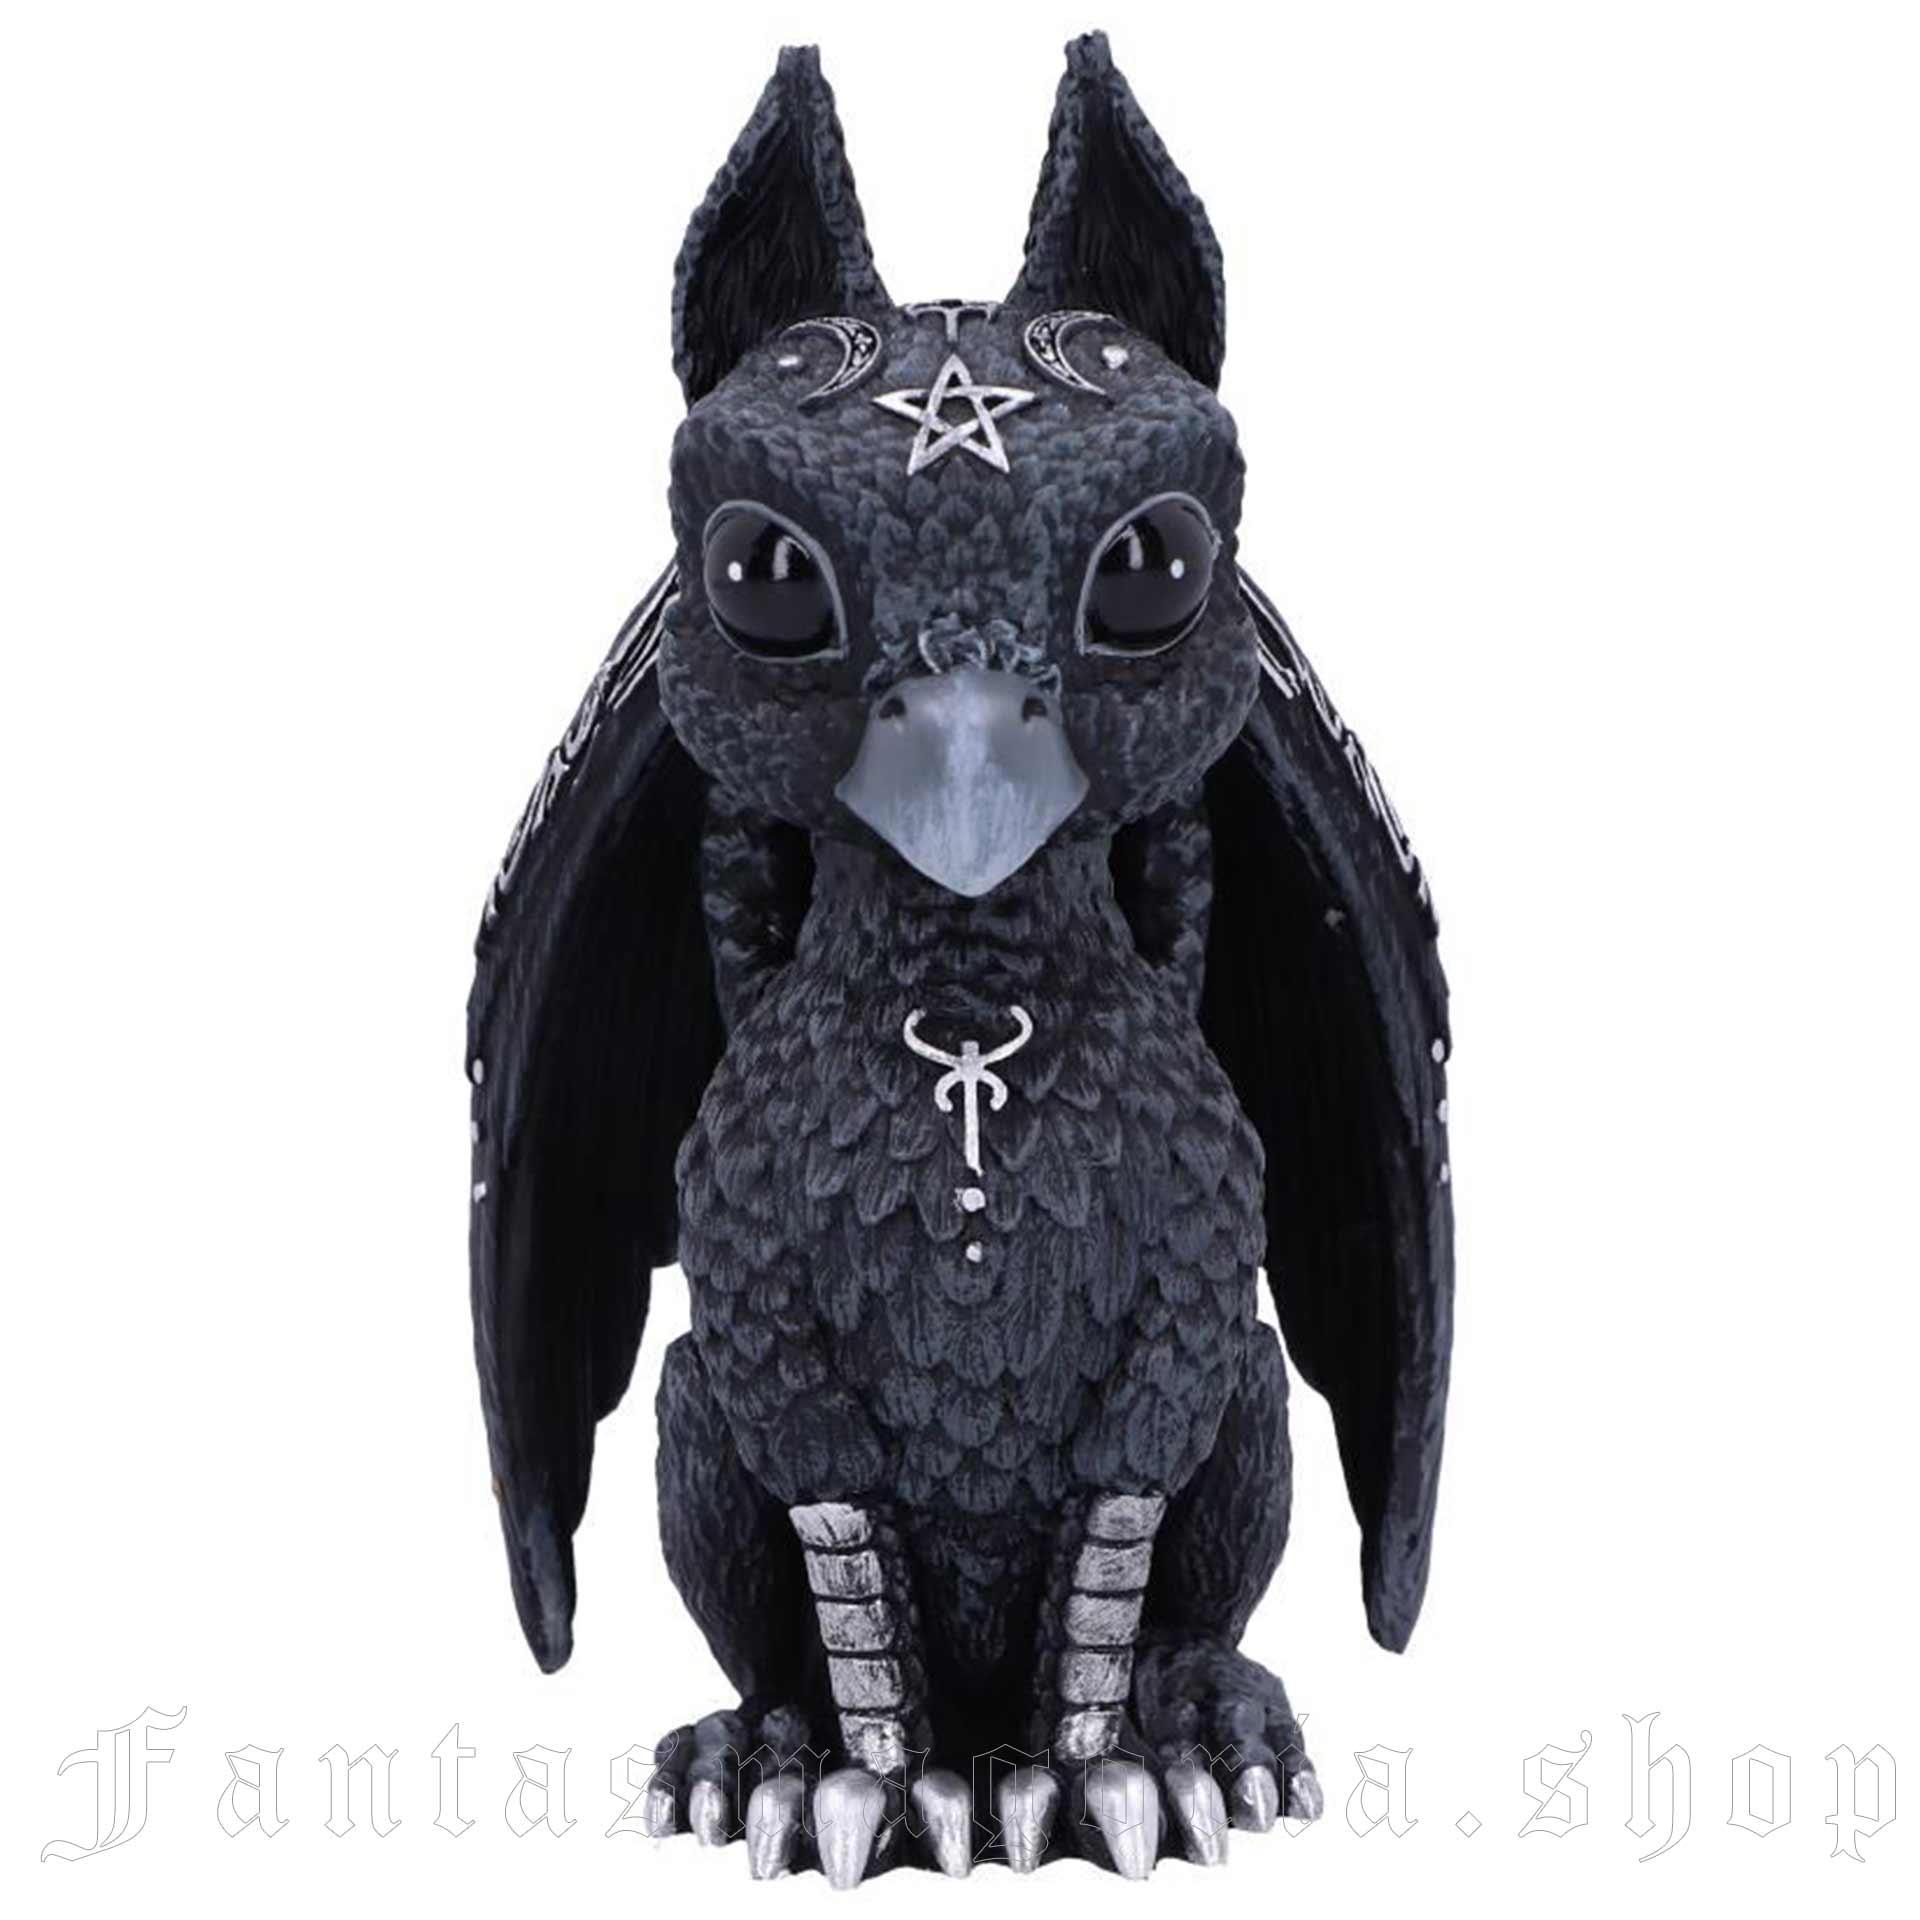 Gothic Occult adorable griffin figurine.. Nemesis Now B6009W2.